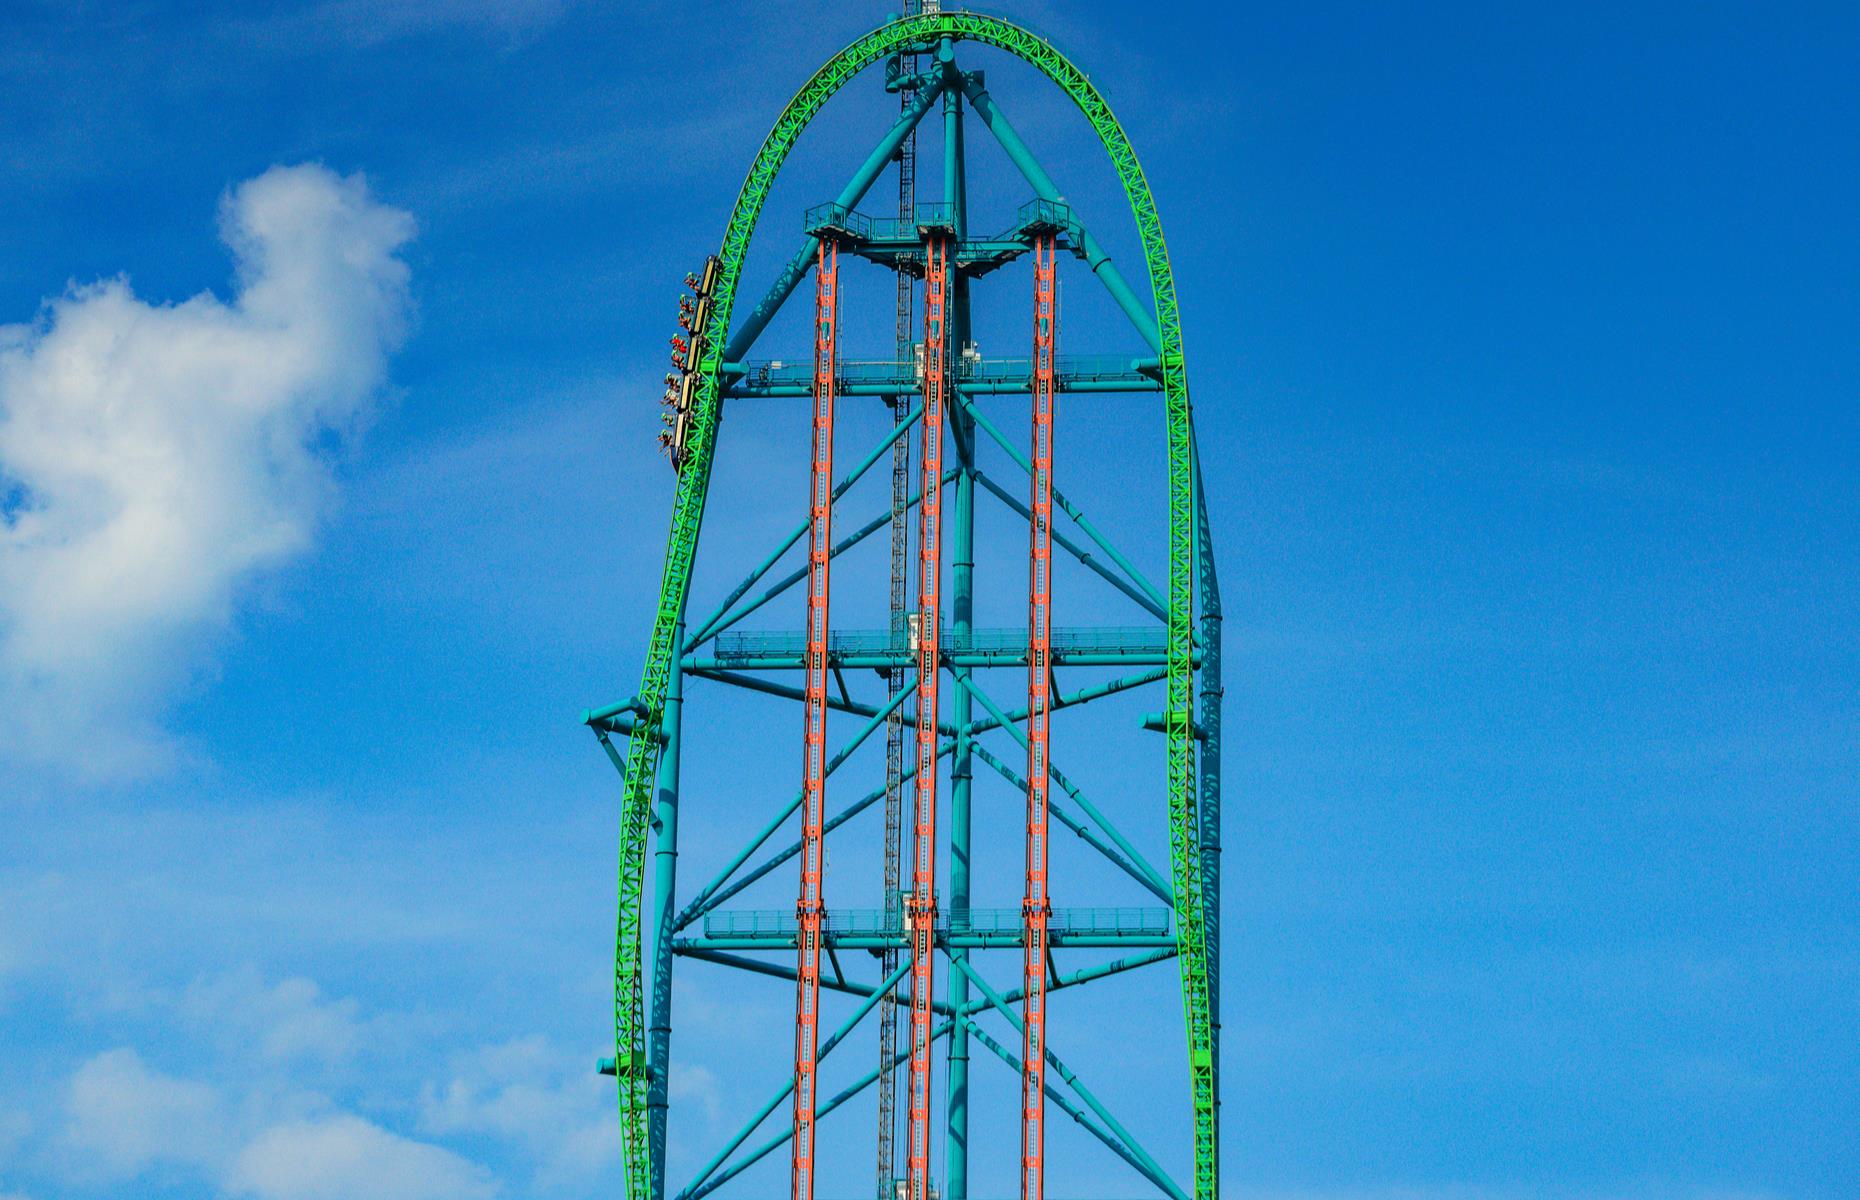 <p>Serious squeals are guaranteed for anyone brave enough to take on the world’s tallest and fastest rollercoaster. <a href="https://www.sixflags.com/greatadventure">Six Flags Great Adventure</a> lays claim to this world record with its coaster Kingda Ka, which reaches heights of up to 456 feet (139m) at an angle of 90 degrees. On launch from the station, riders go from zero to 128 miles per hour (206km/h) in just 3.5 seconds. After reaching the top, they're launched back down in a terrifying 270-degree spiral followed by a 129-foot (39m) camel hump for good measure. </p>